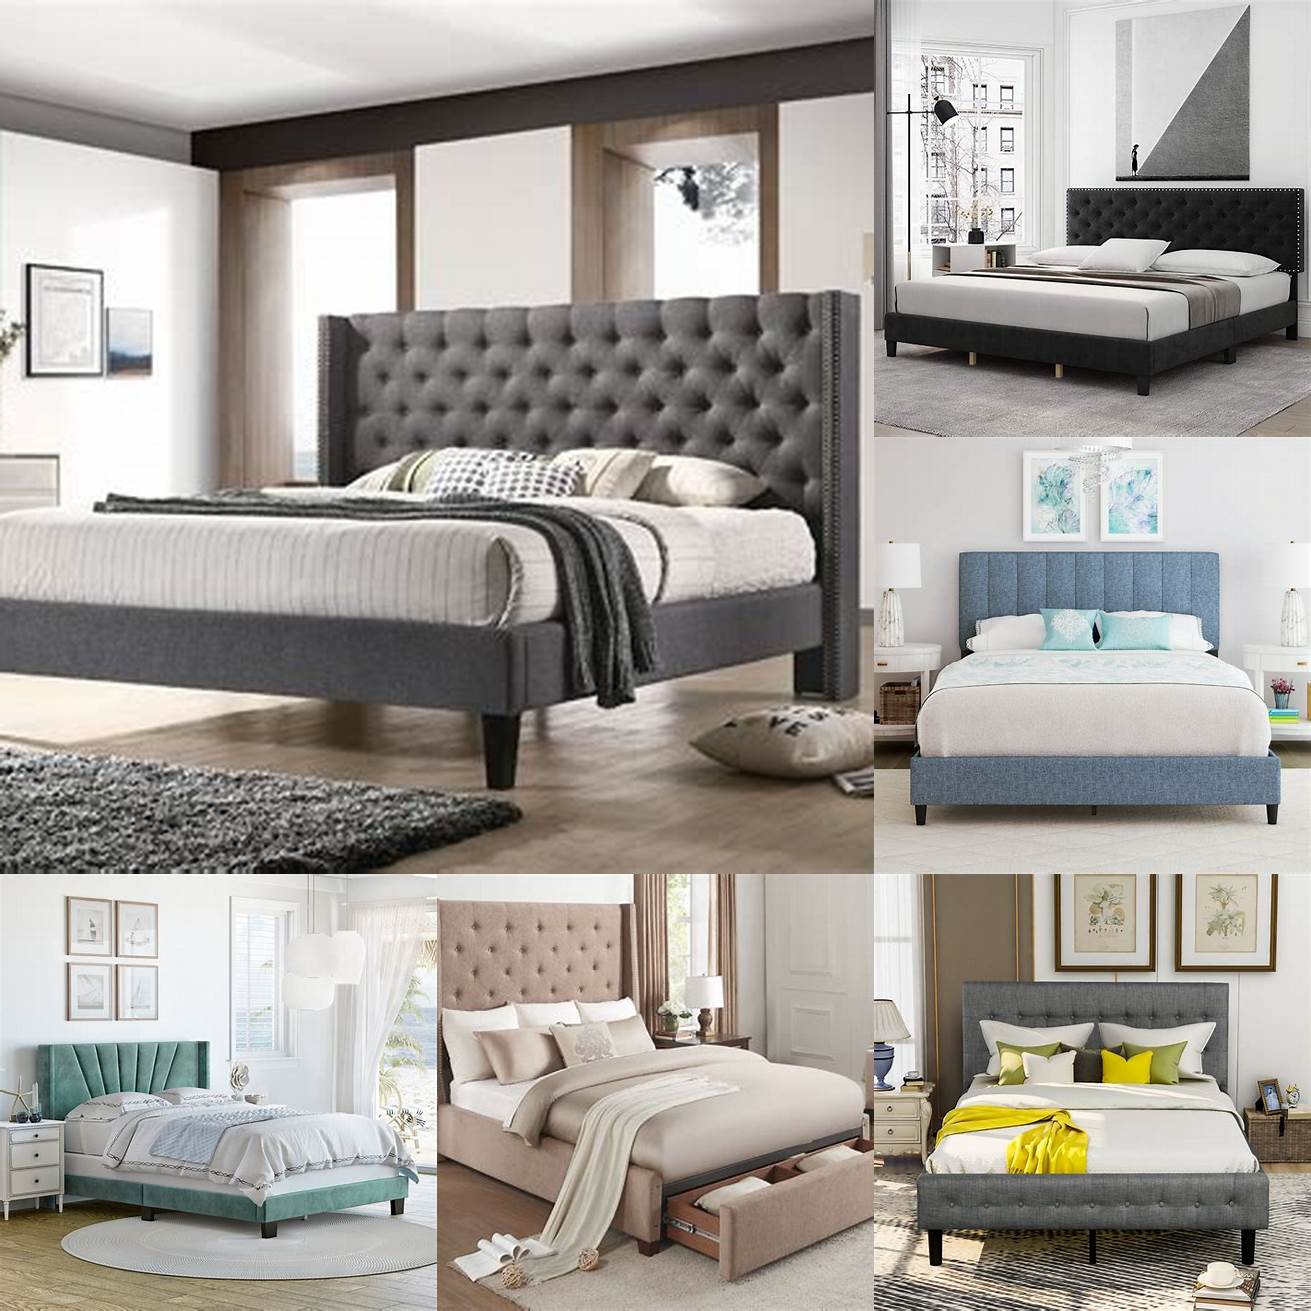 Bedroom inspiration featuring the Upholstered Platform Bed Queen